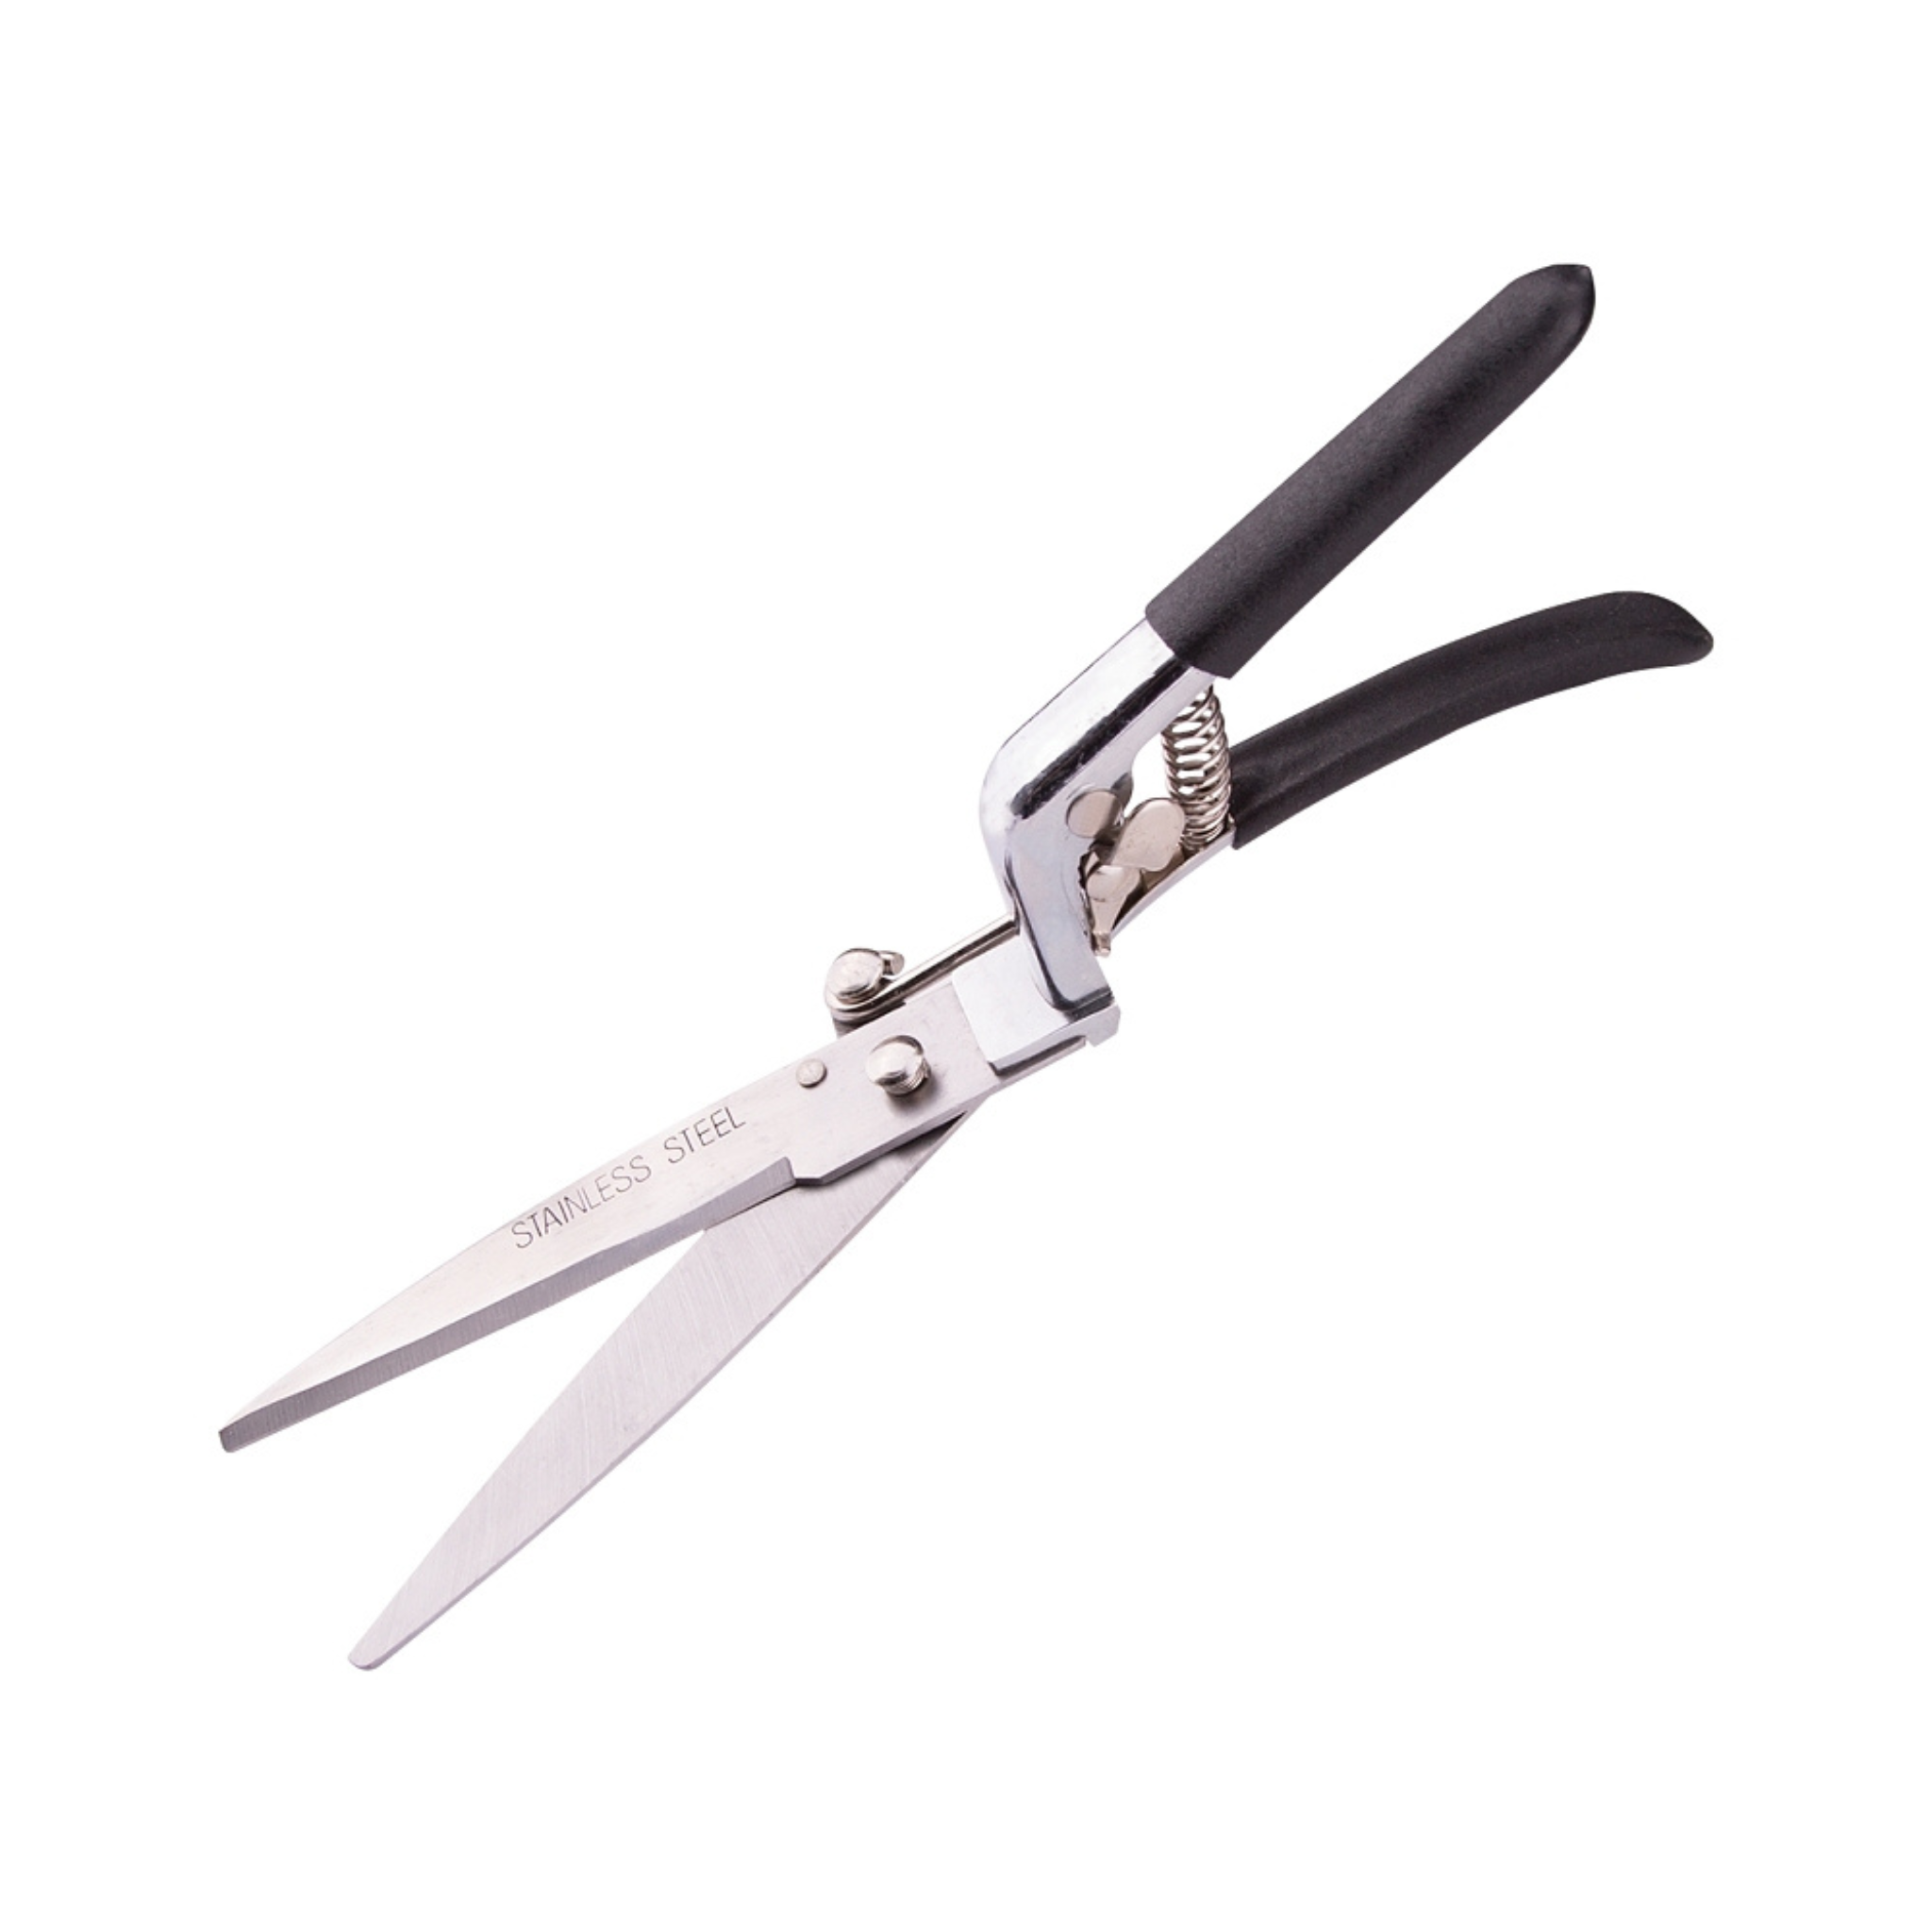 12" Stainless Steel Grass Shears